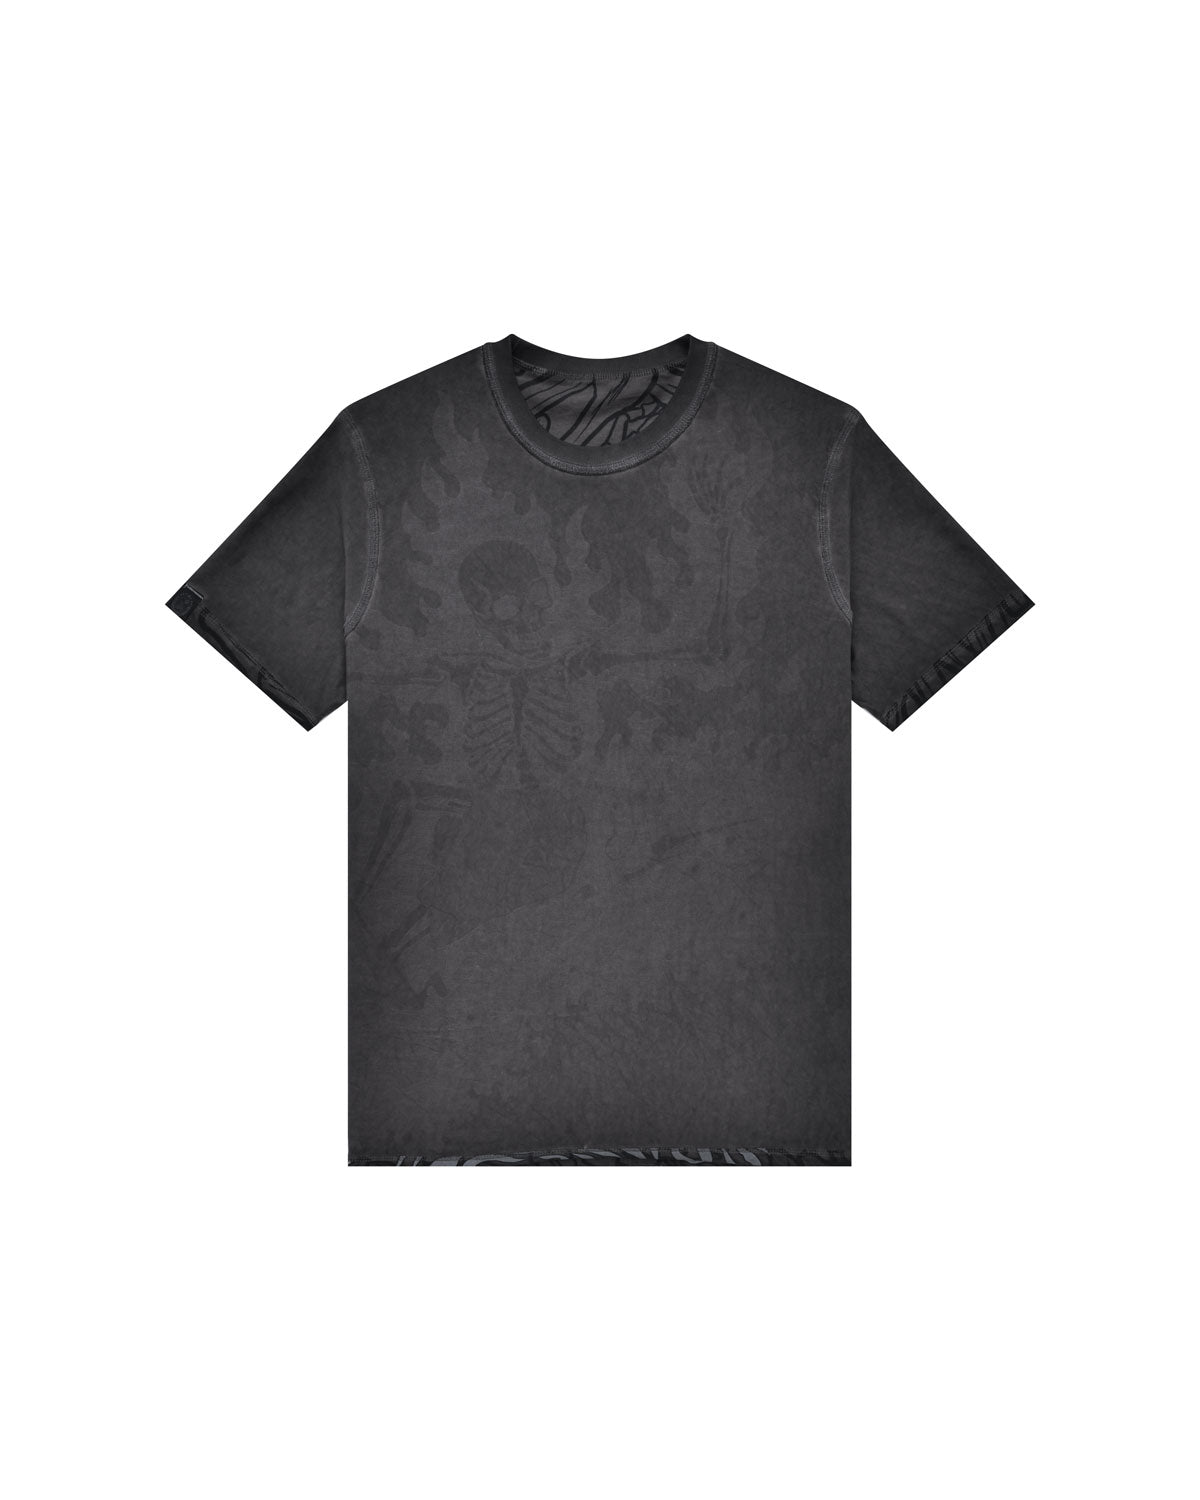 Man | Doubleface T-Shirt "Hell Of A Surfer" Charcoal